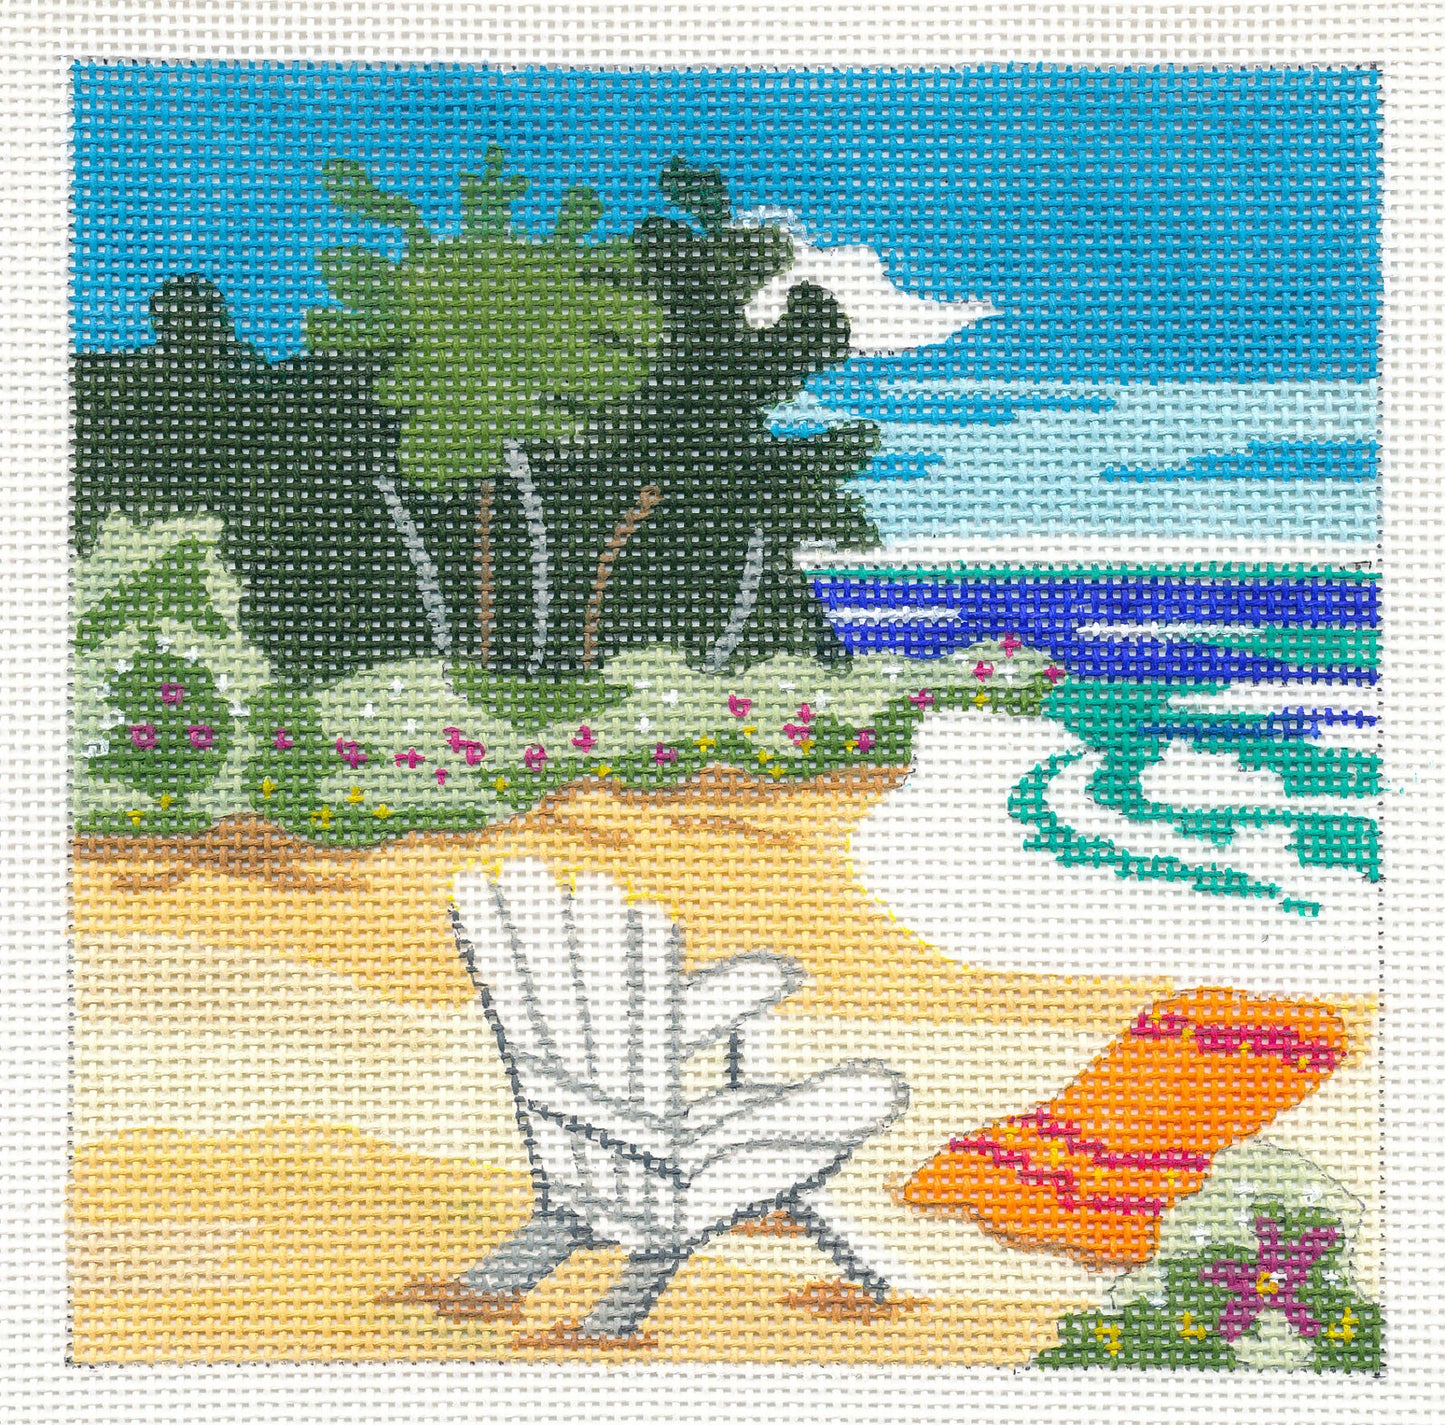 Canvas SET ~ Serene Beach Day with STITCH GUIDE on handpainted 18 Mesh Needlepoint Canvas by KAMALA ~ PLD Designs